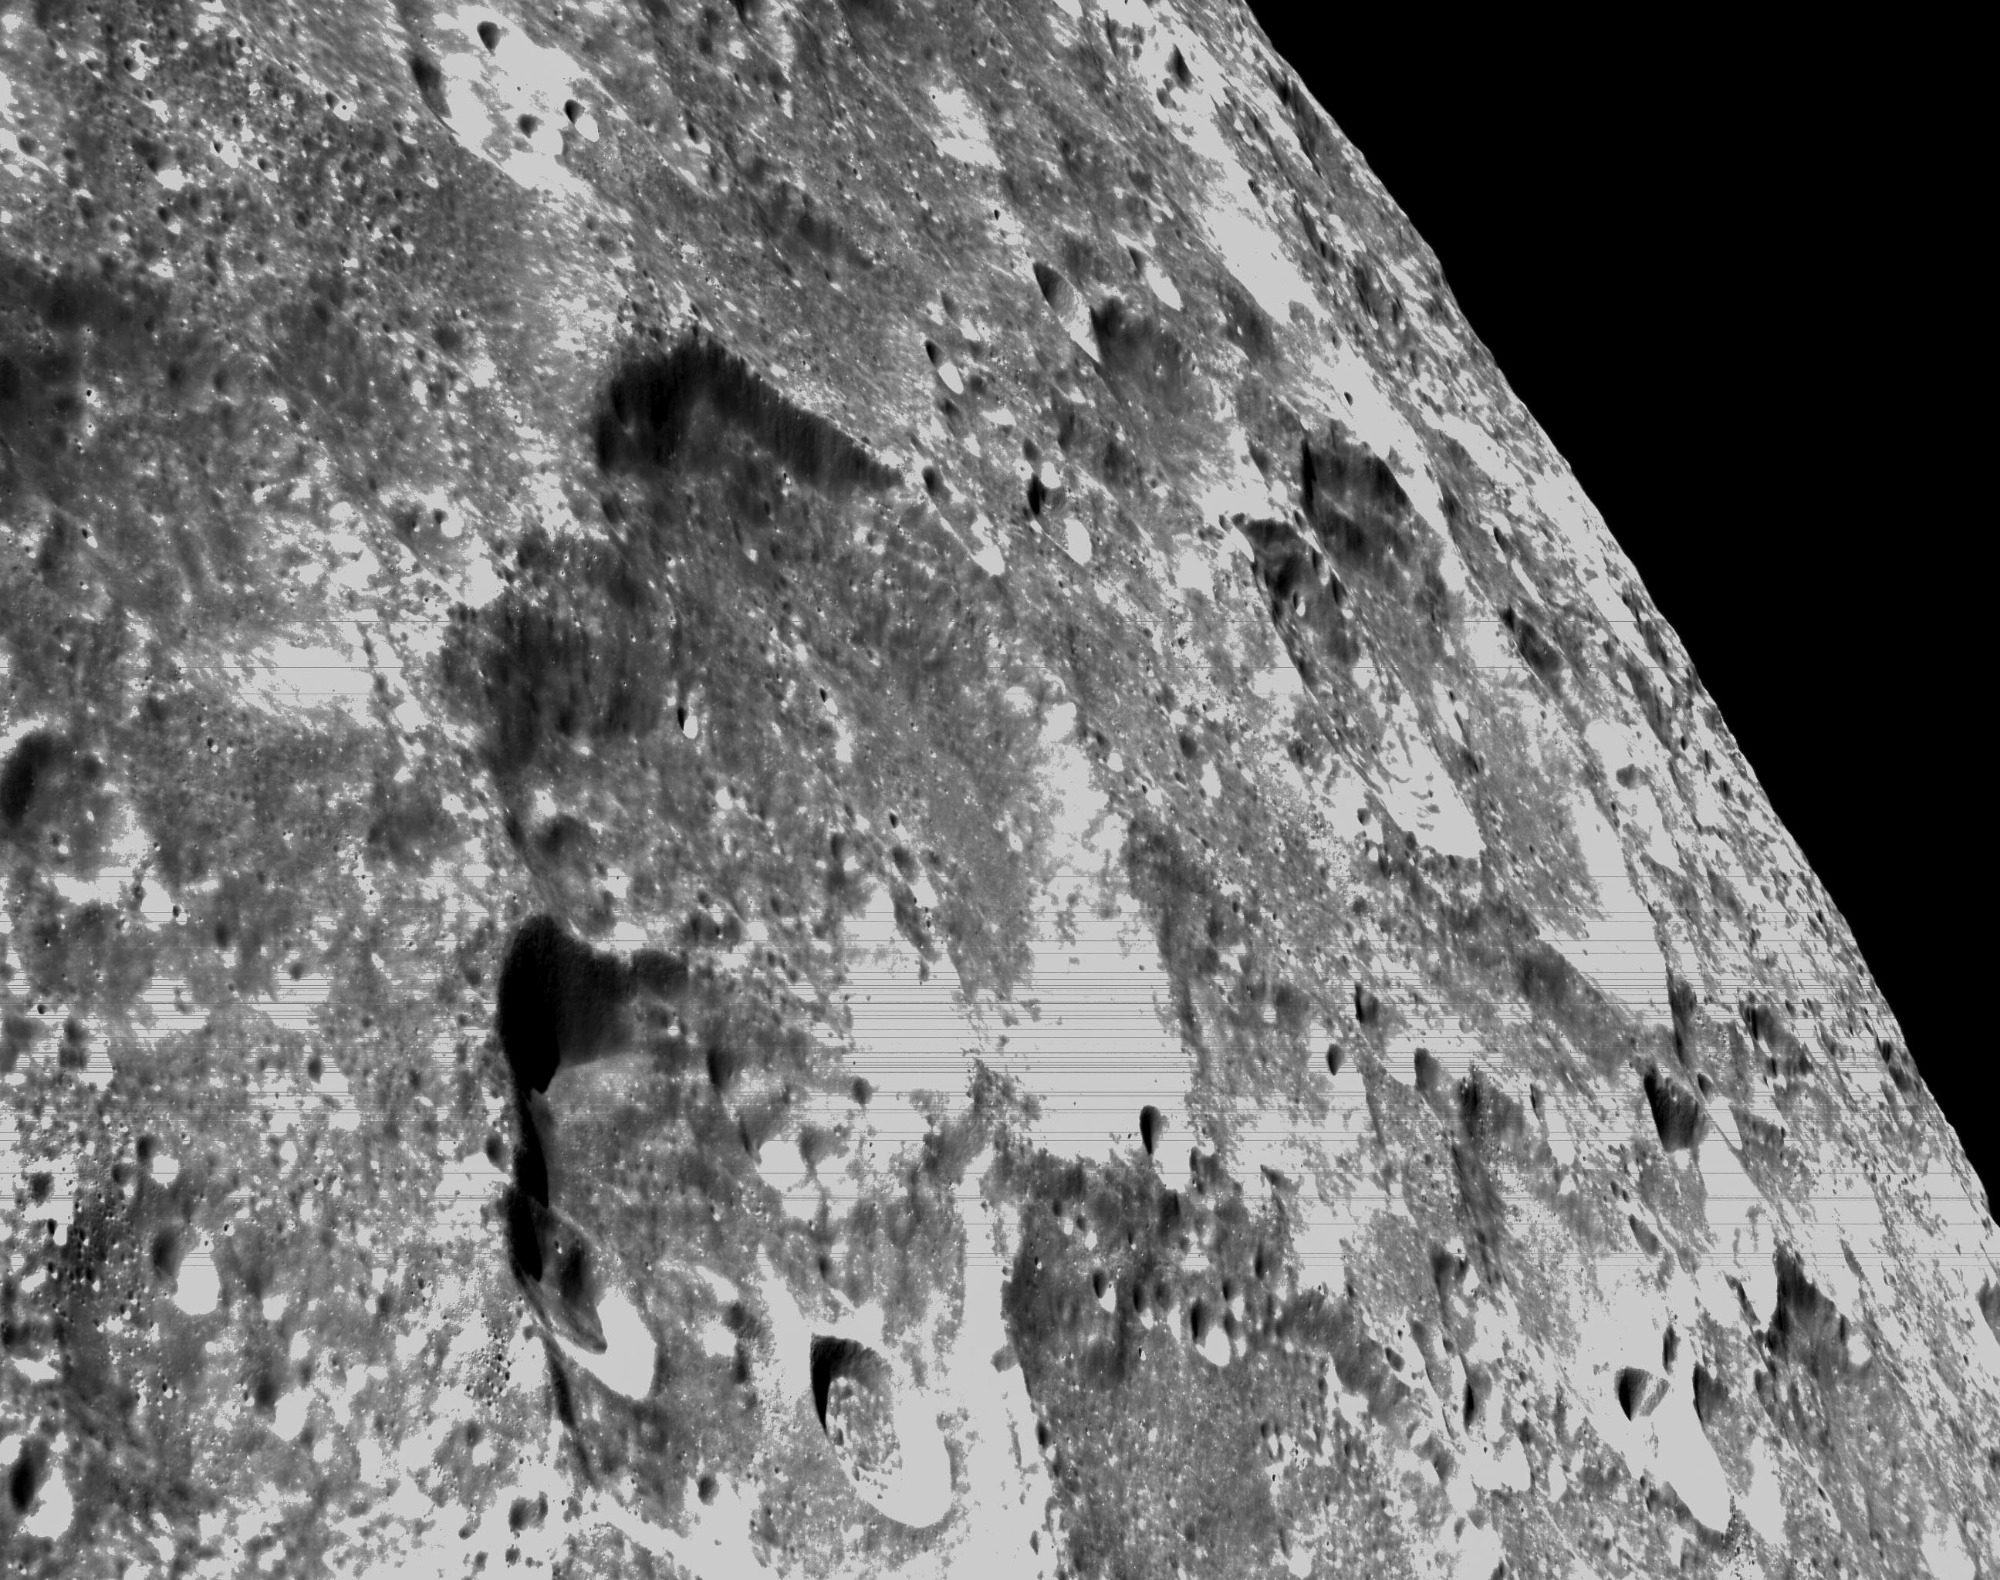 Orion sends back new images of the moon’s craters, some of which could be home to ice and water